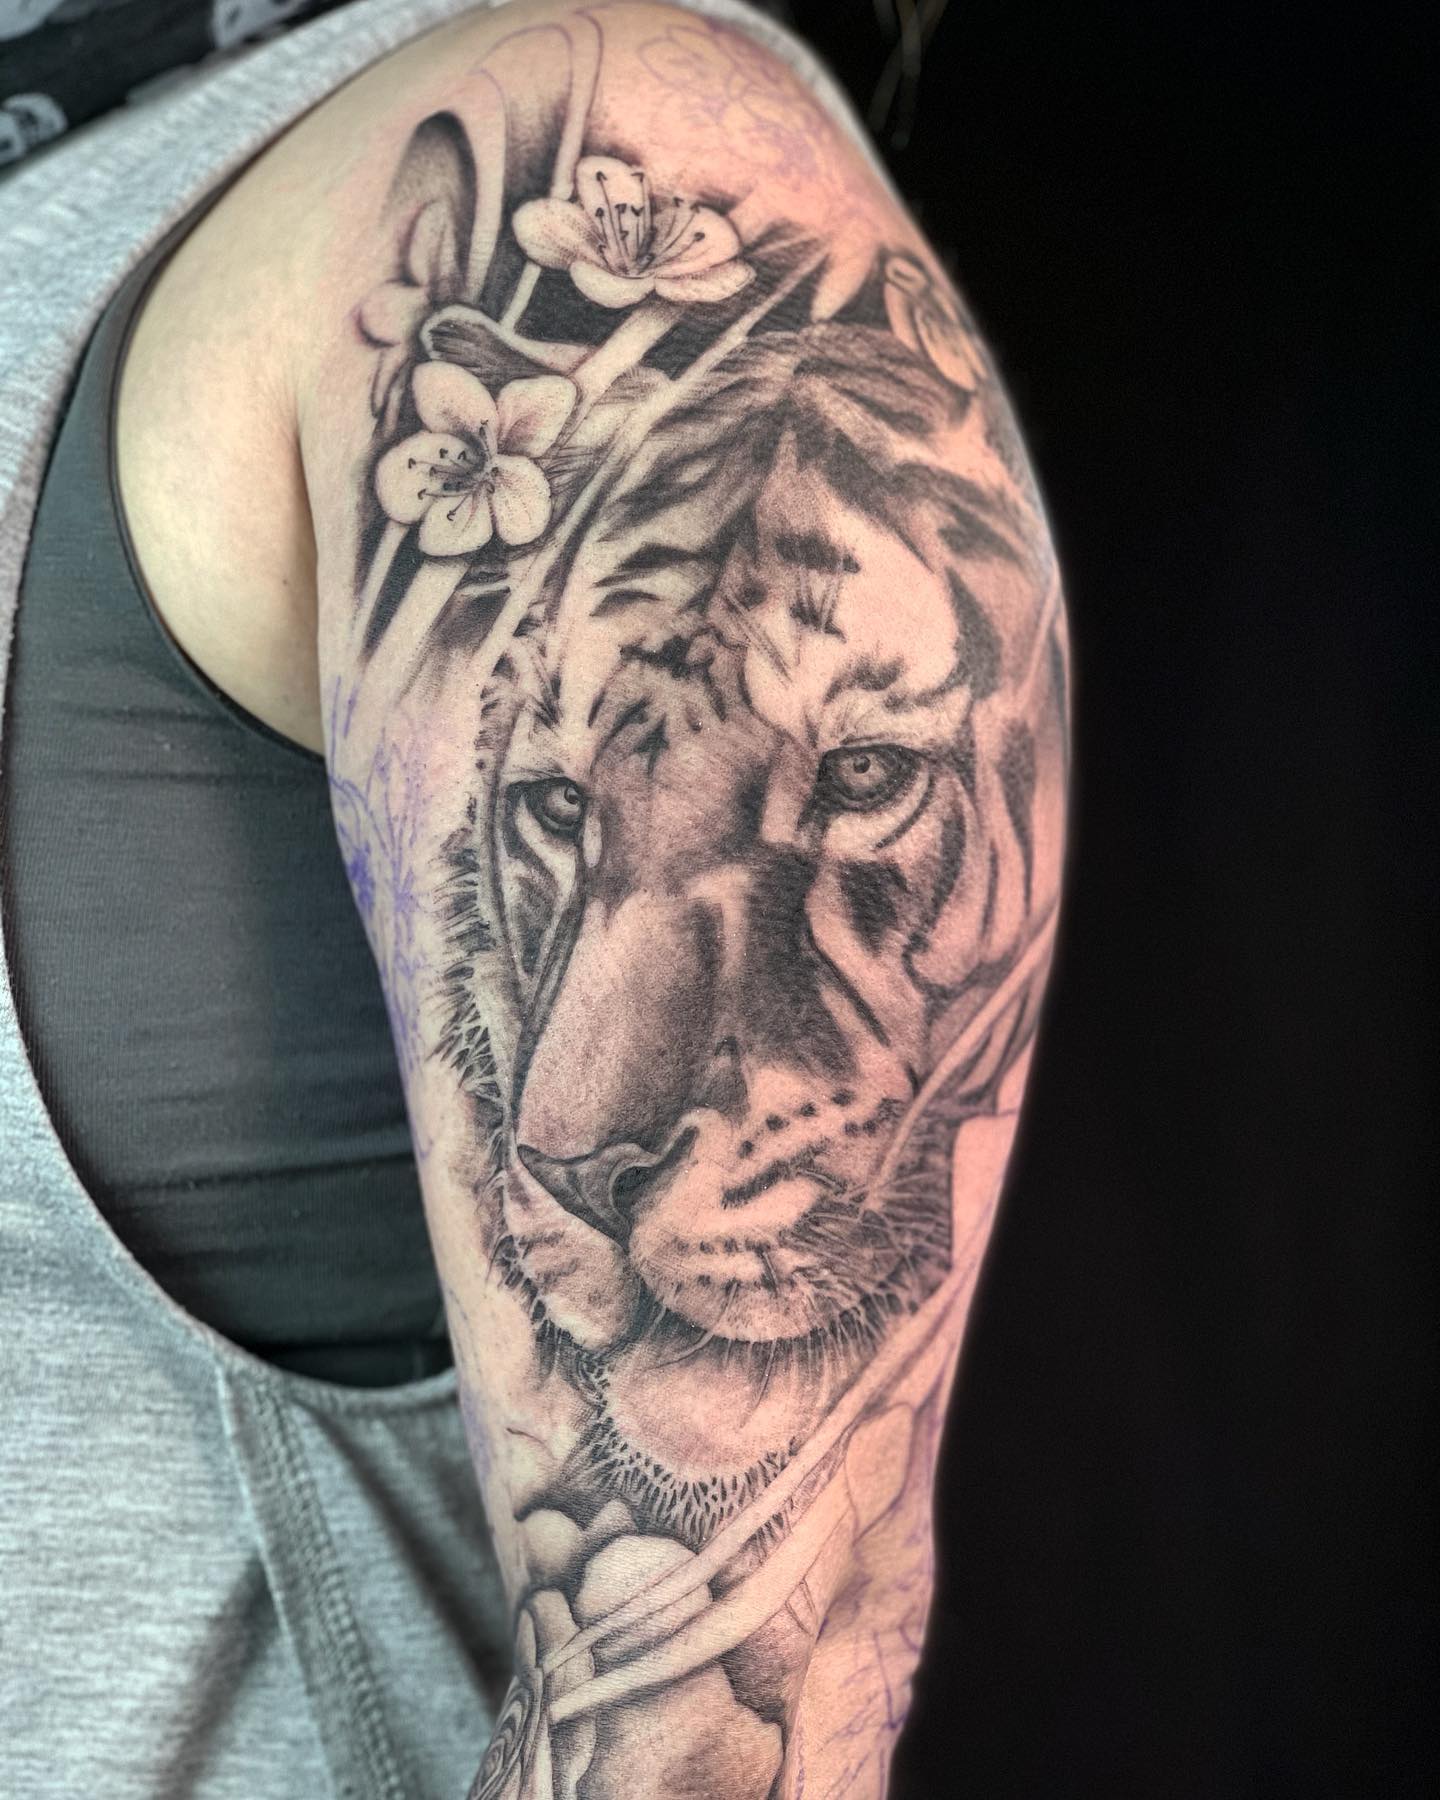 101 Best Tiger Sleeve Tattoo Ideas That Will Blow Your Mind!